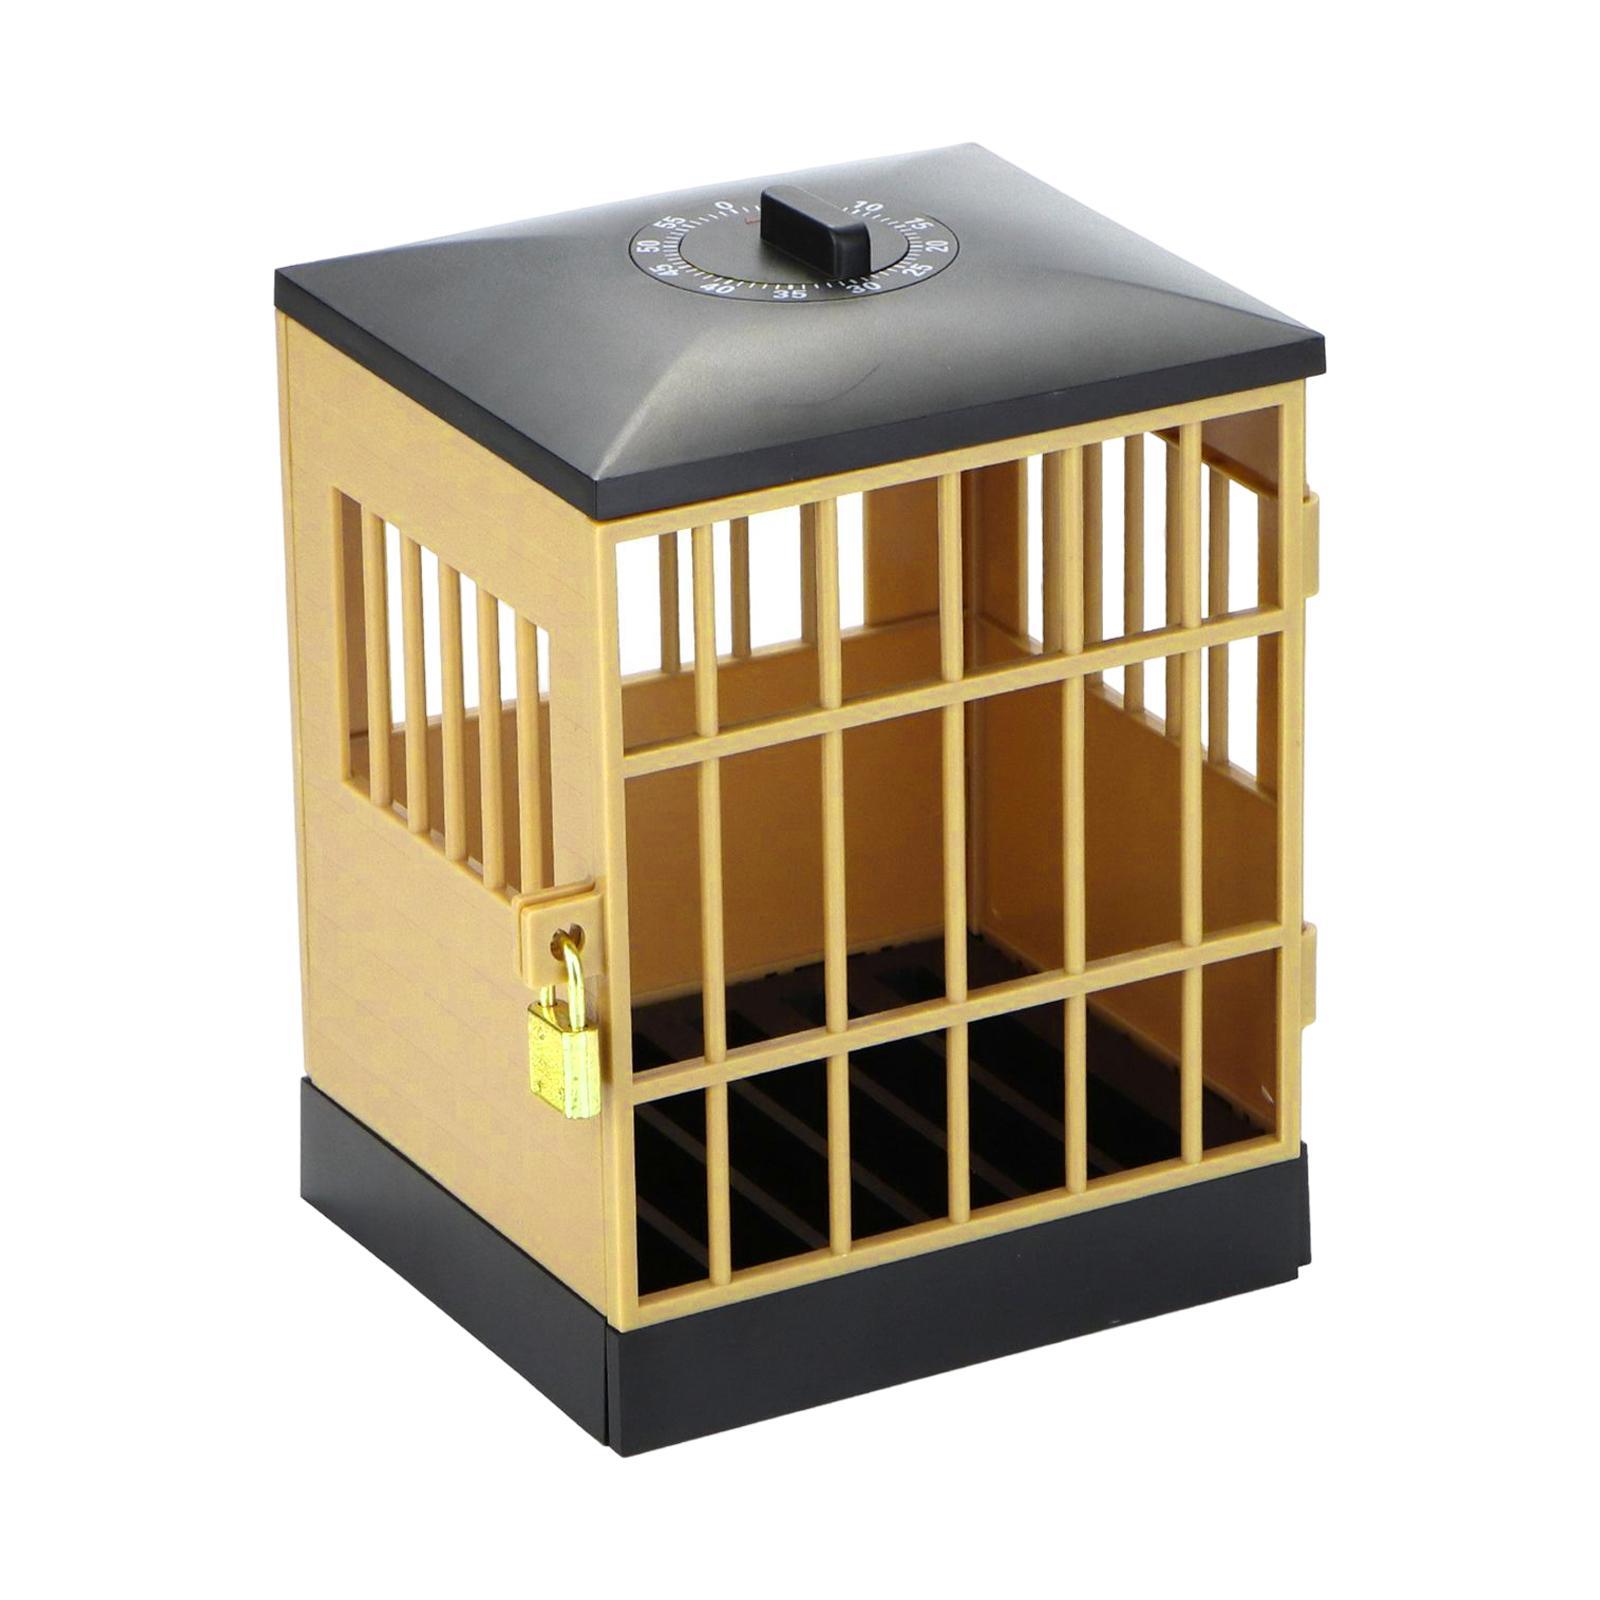 Phone Lock Box Jail Prison Gift Gadget Novelty for Cell Phones Kids Adults